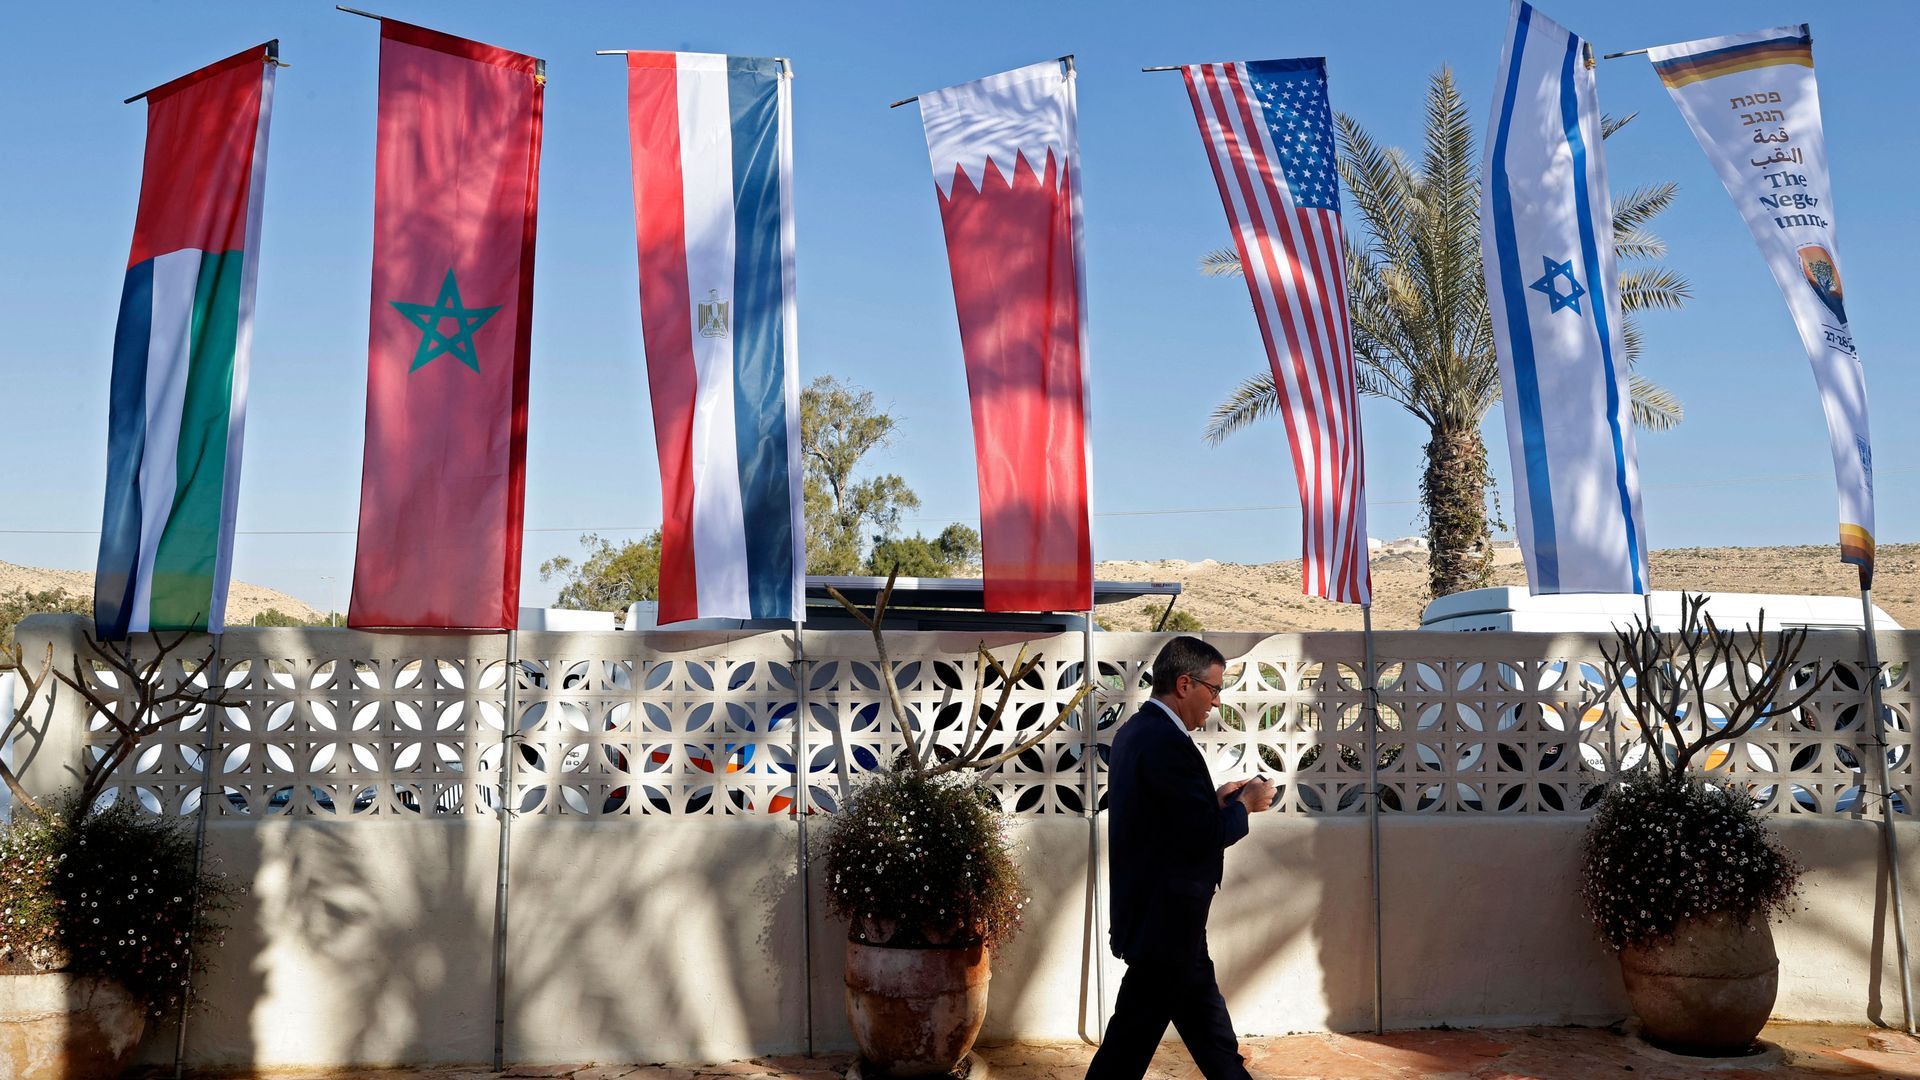 Flags are set up during the Negev Summit in the southern Negev desert on March 28, 2022. Photo: Jack Guez/AFP via Getty Images